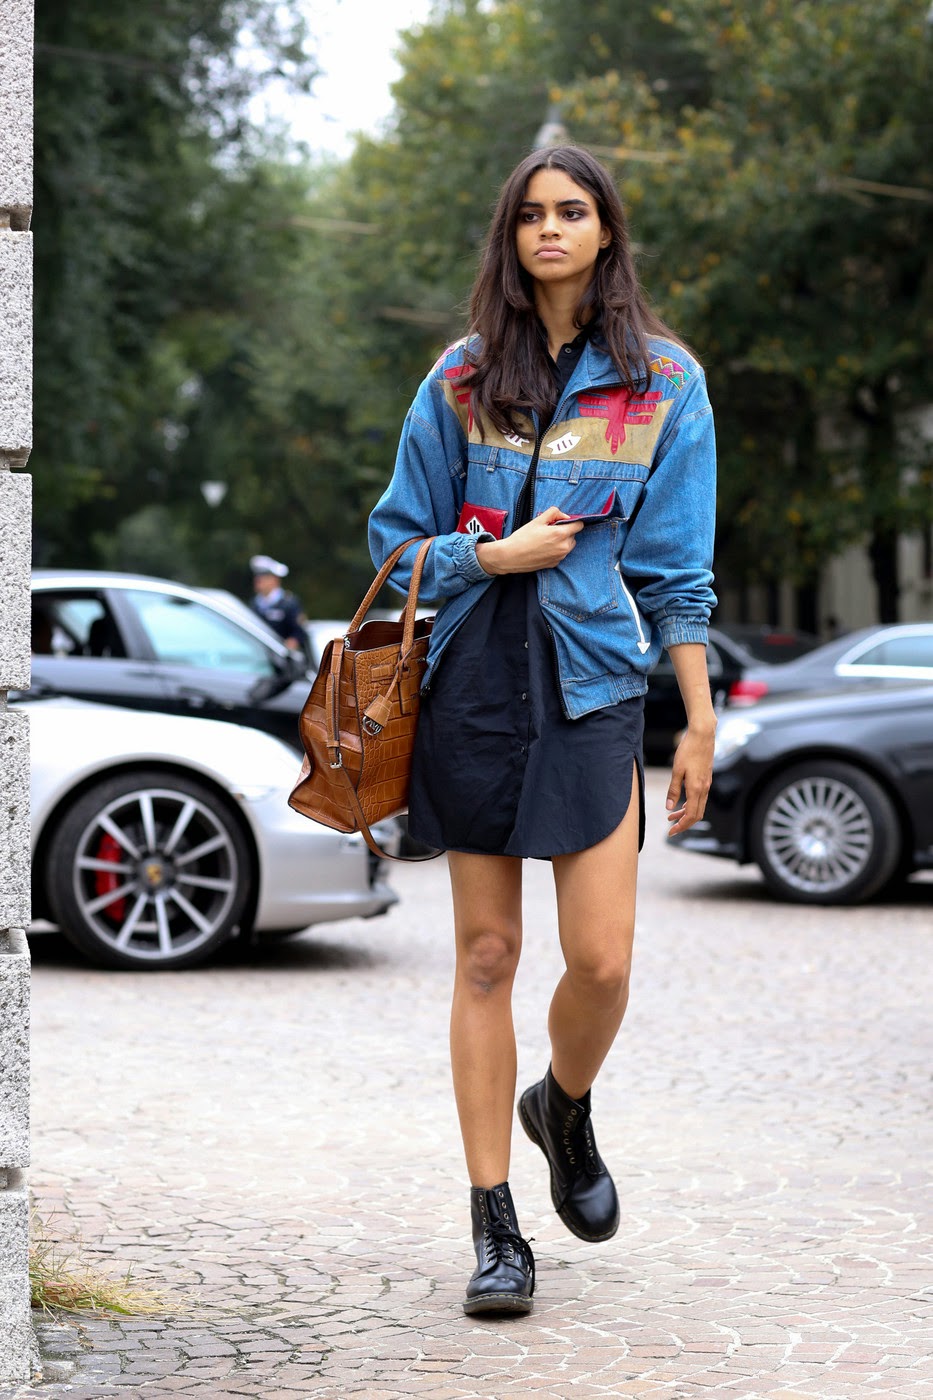 Model Street Style: Milan Spring/Summer 2015 [Part 2] - The Front Row View